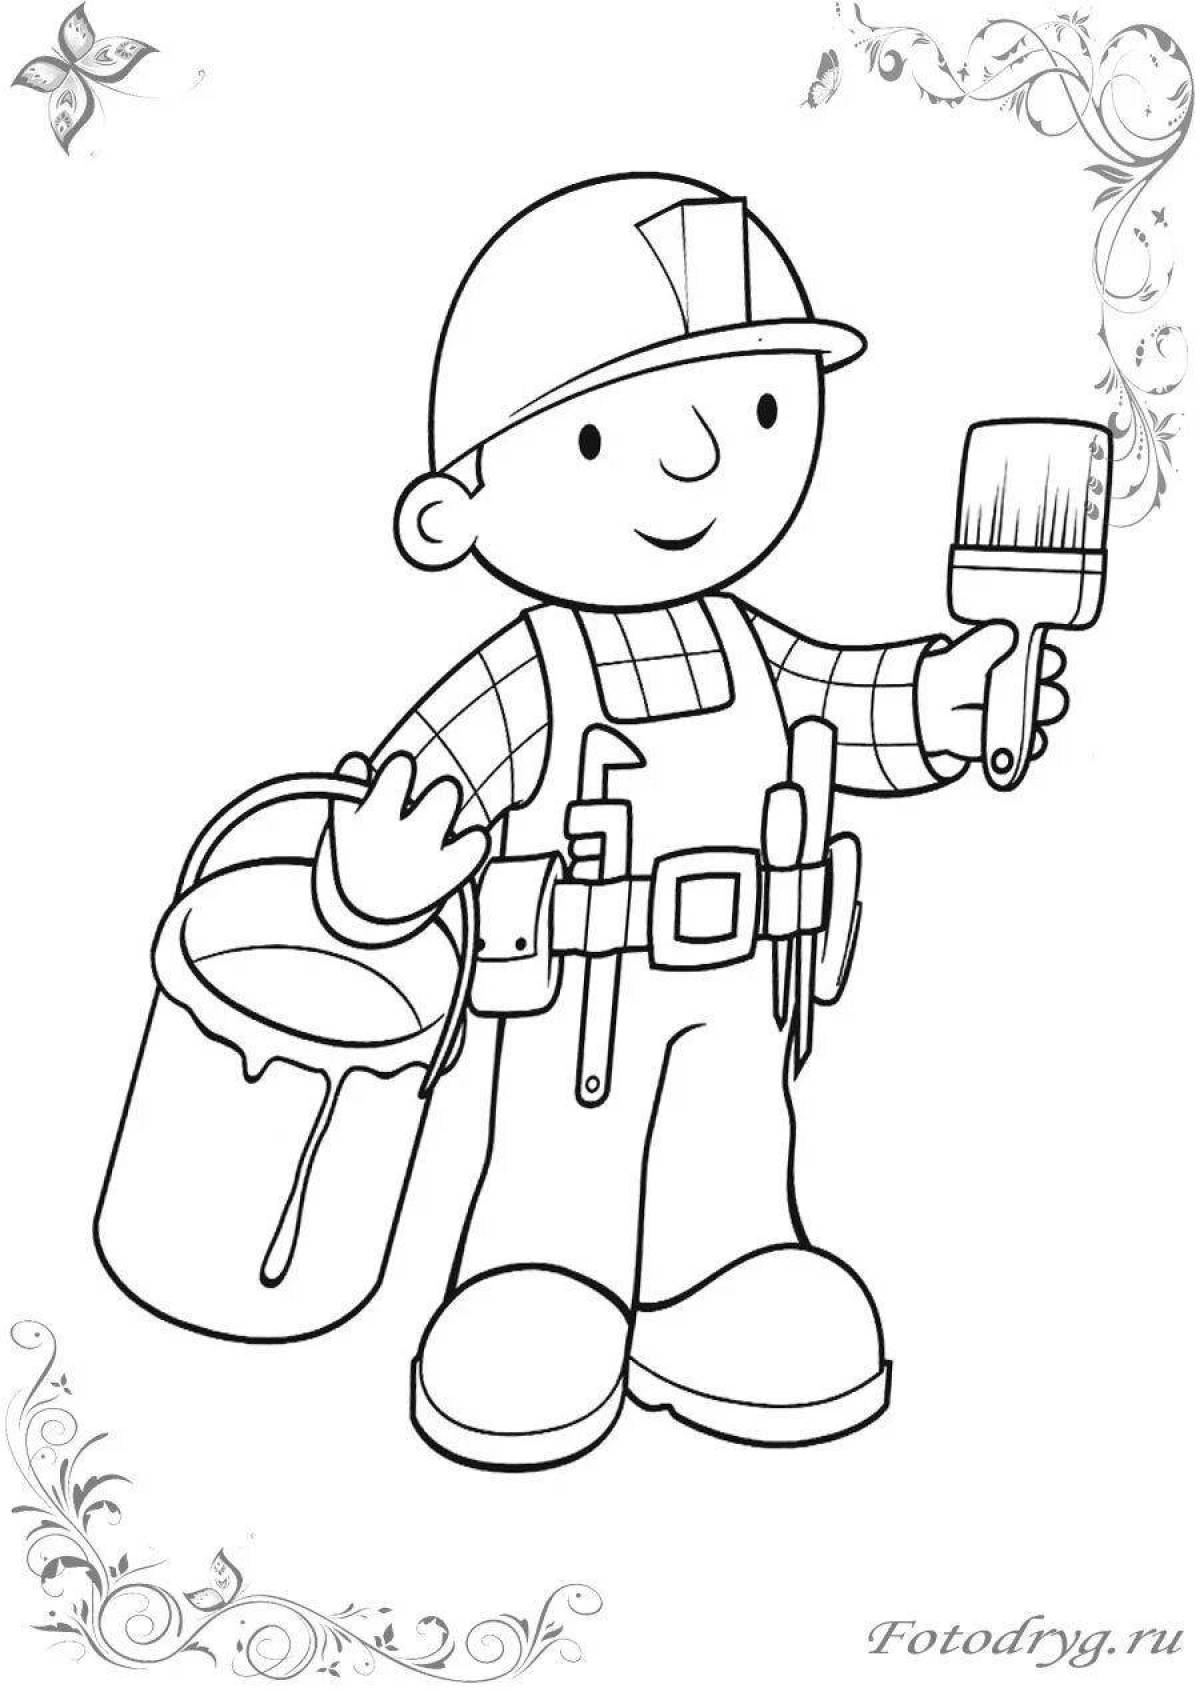 Playful coloring page of construction professions